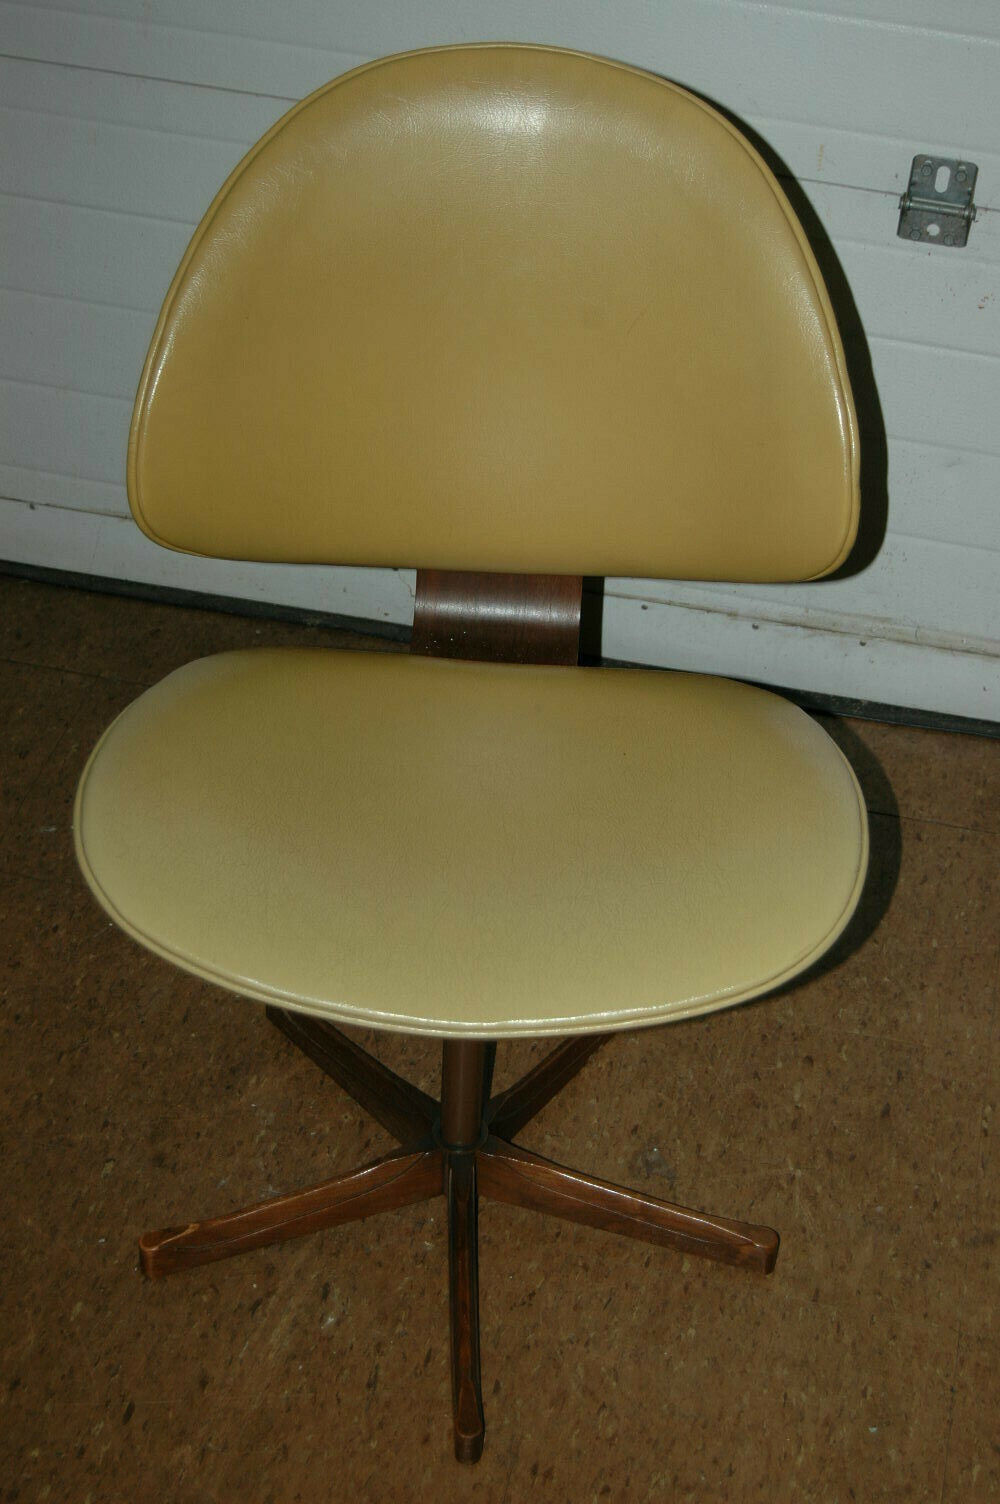 Primary image for Vintage Mid Century Bent Wood Plywood Office Chair Neat 33" Tall Yellow Cushion